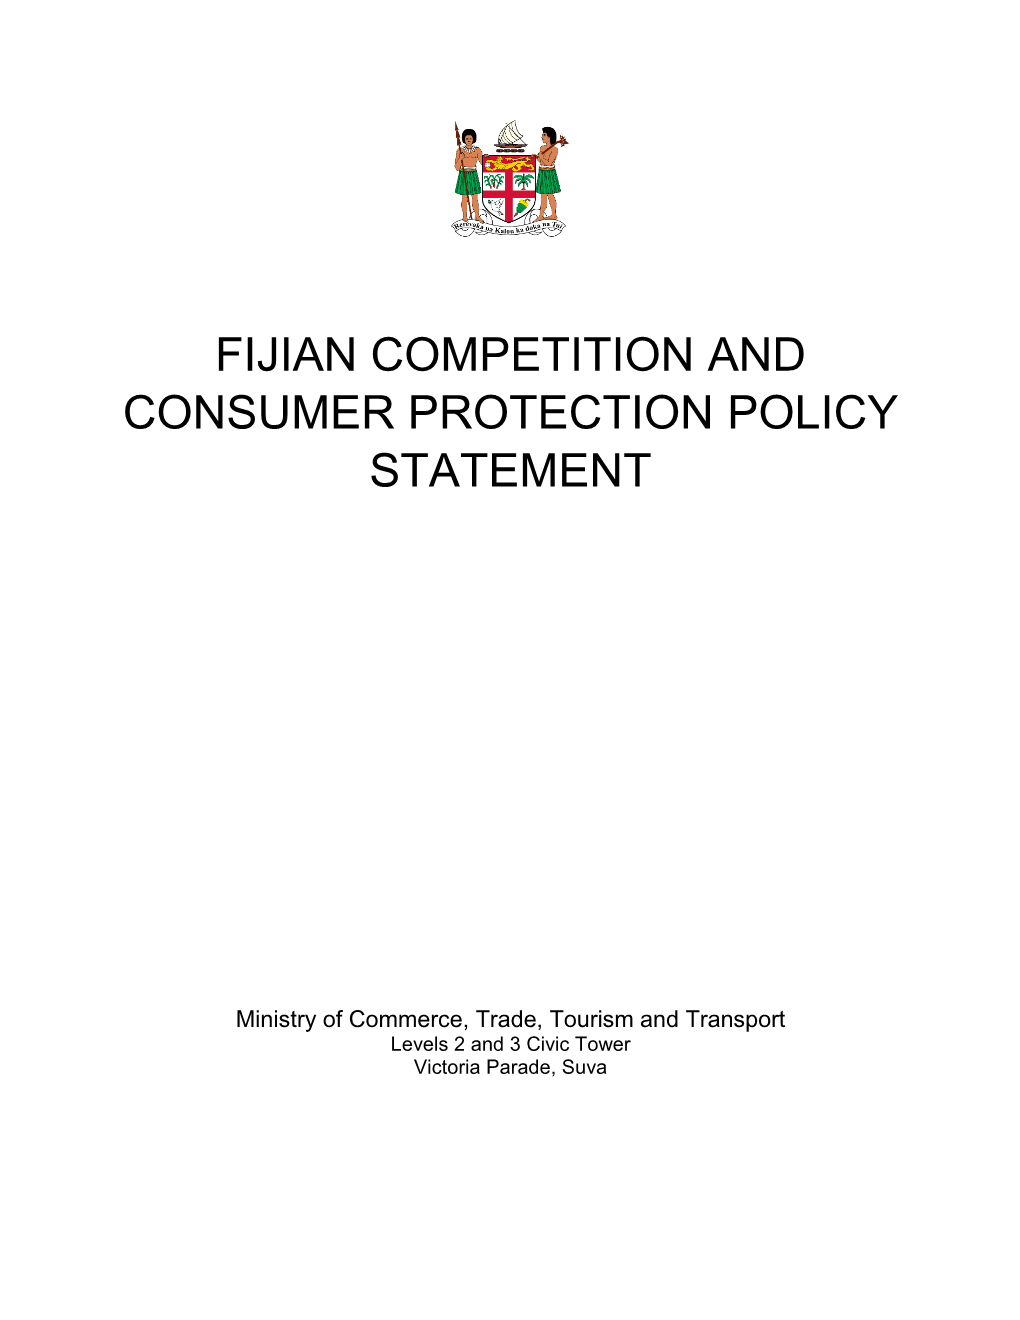 Fijian Competition and Consumer Protection Policy Statement